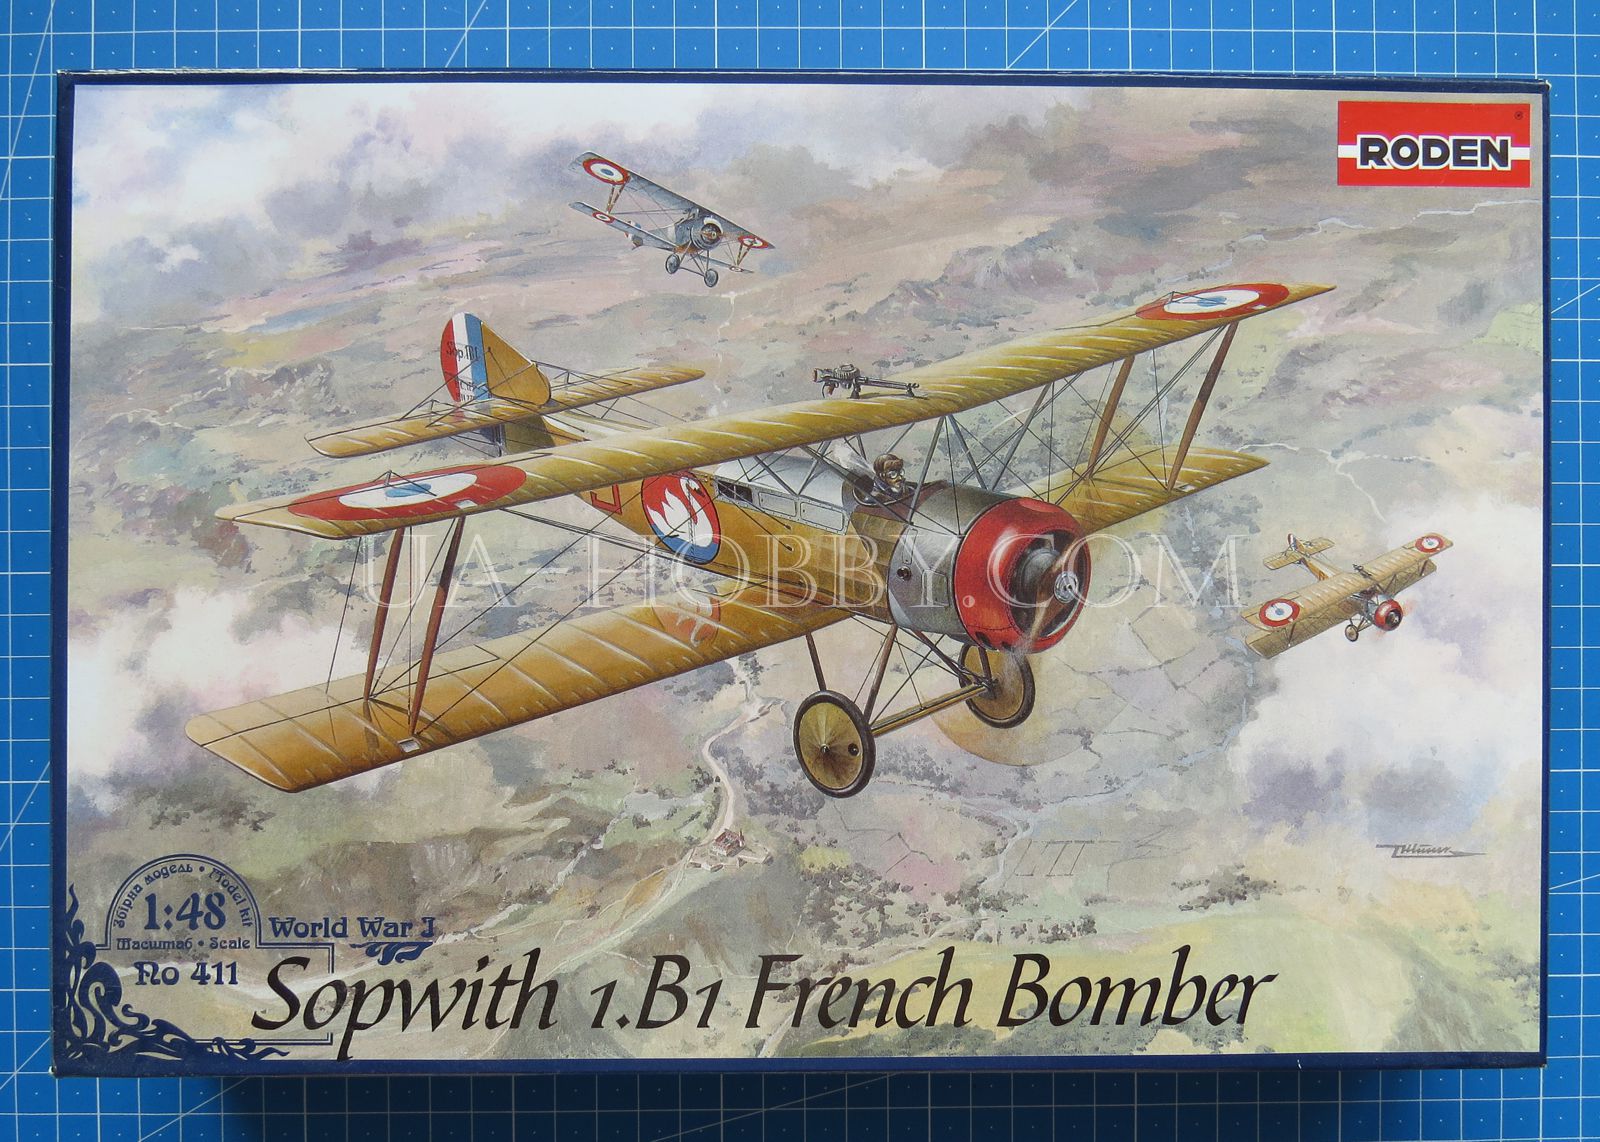 1/48 Sopwith 1.B1 French Bomber. Roden 411